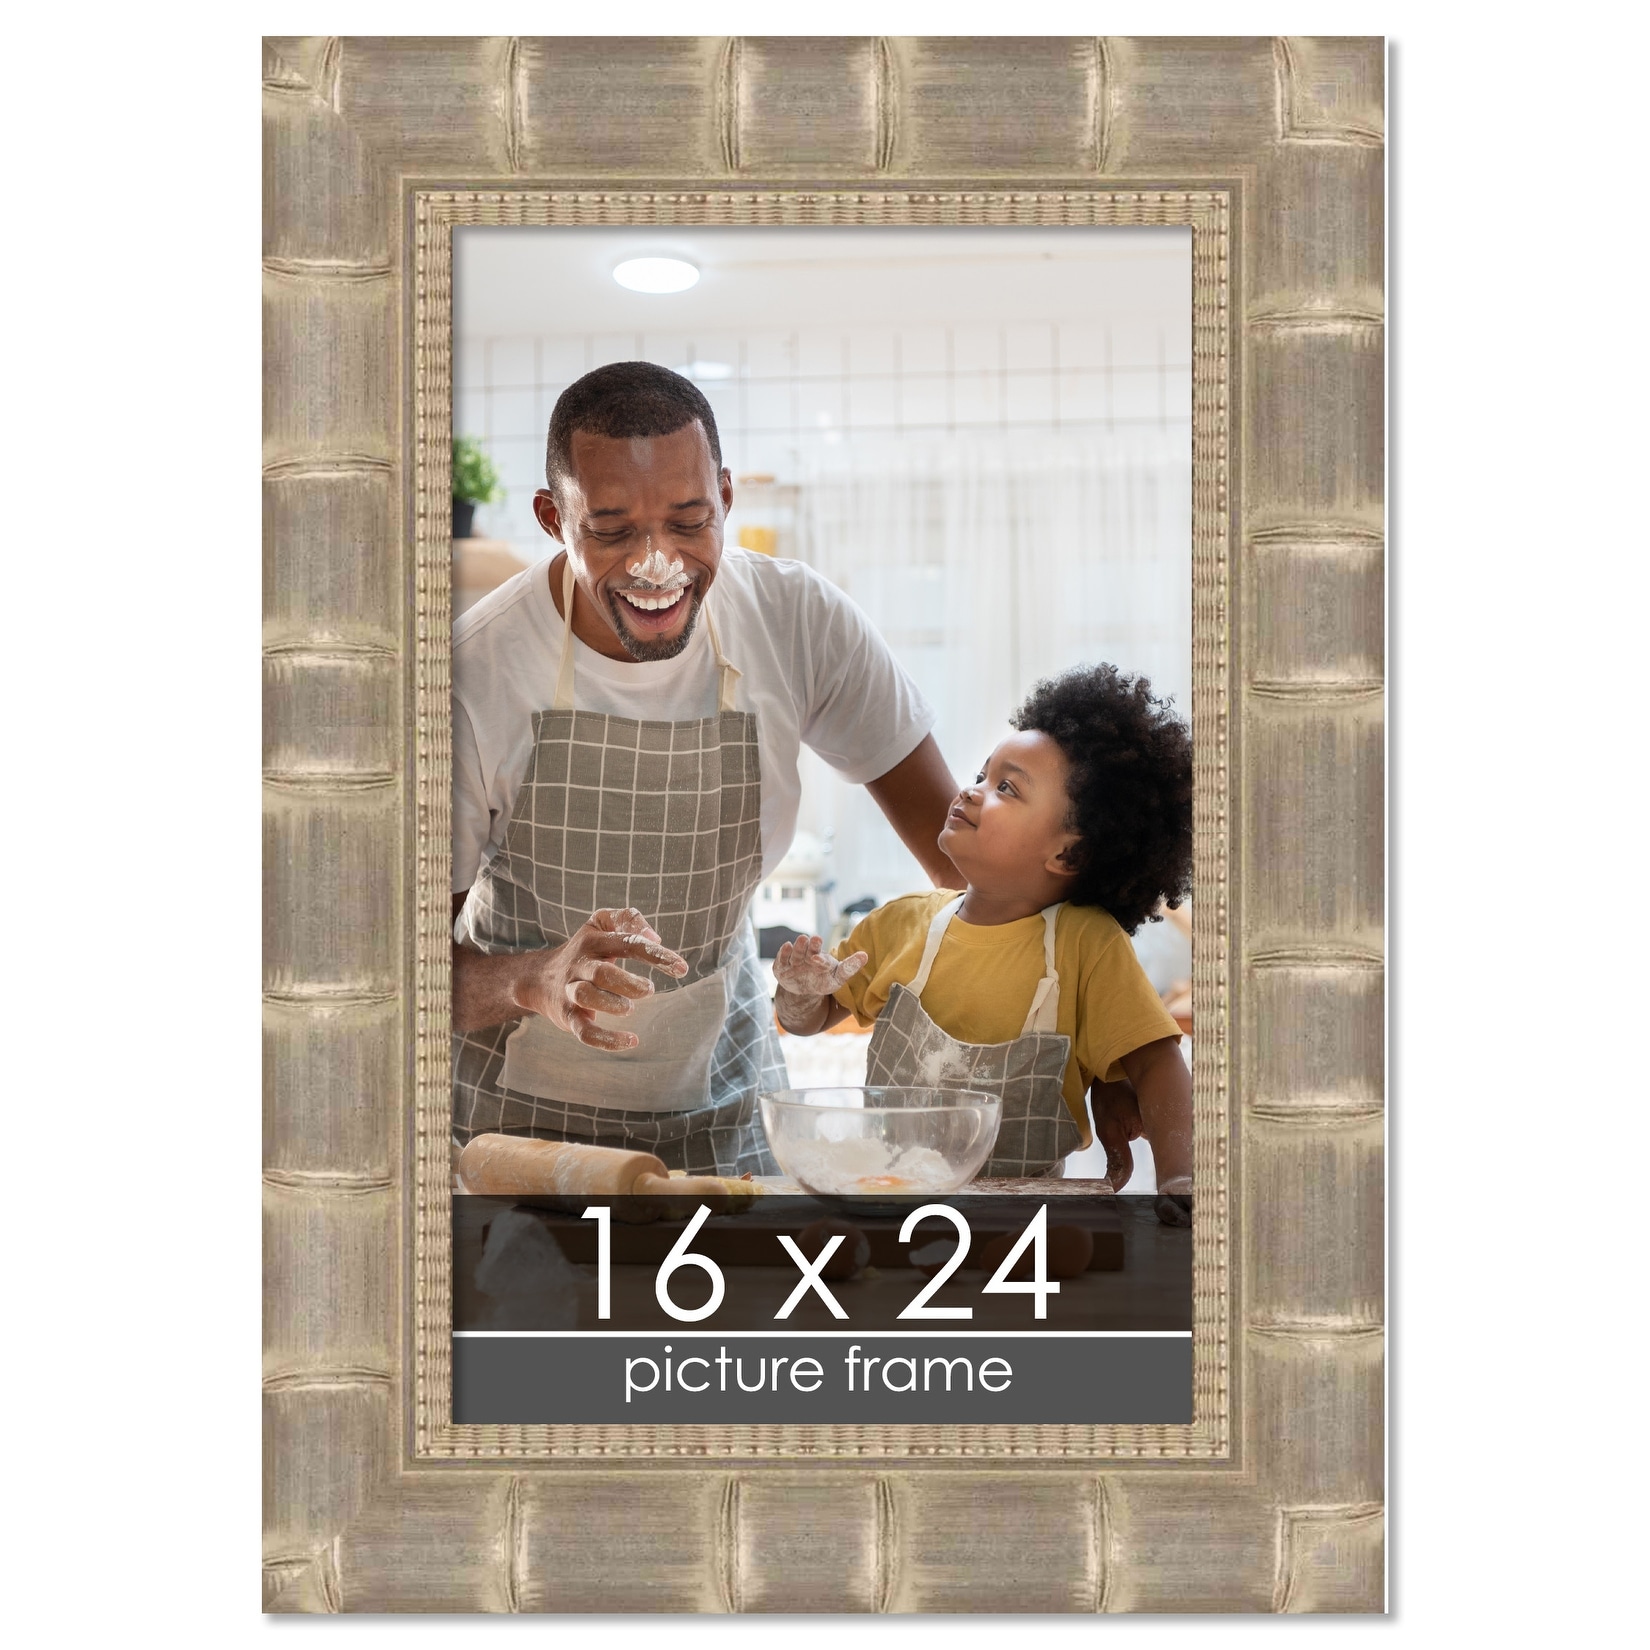 16x24 Bamboo Silver Complete Wood Picture Frame with UV Acrylic, Foam Board Backing, & Hardware